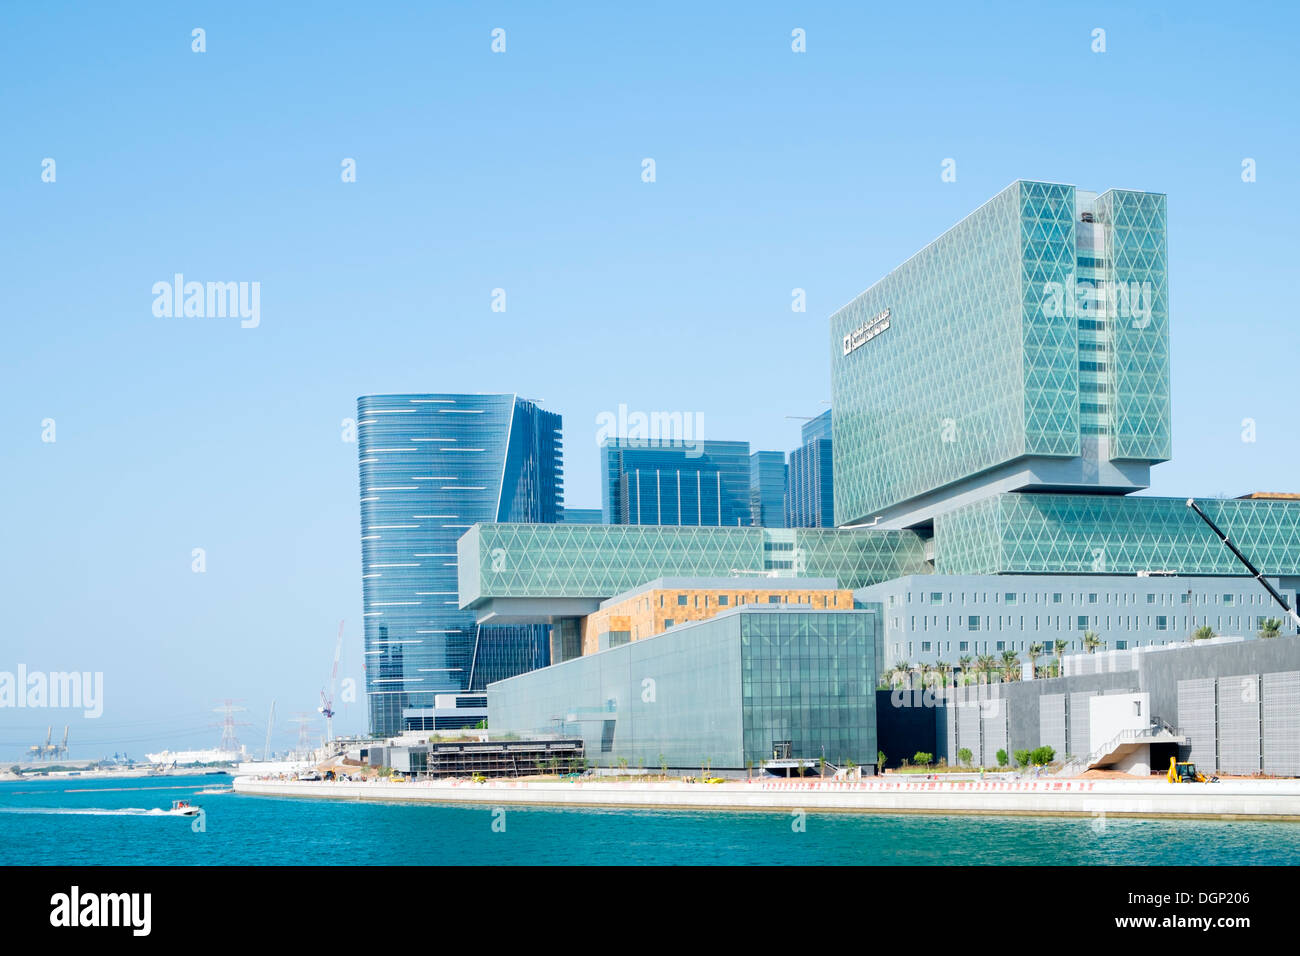 Exterior of new Cleveland Clinic hospital on Al Maryah Island the new Central Business District under construction in Abu Dhabi Stock Photo